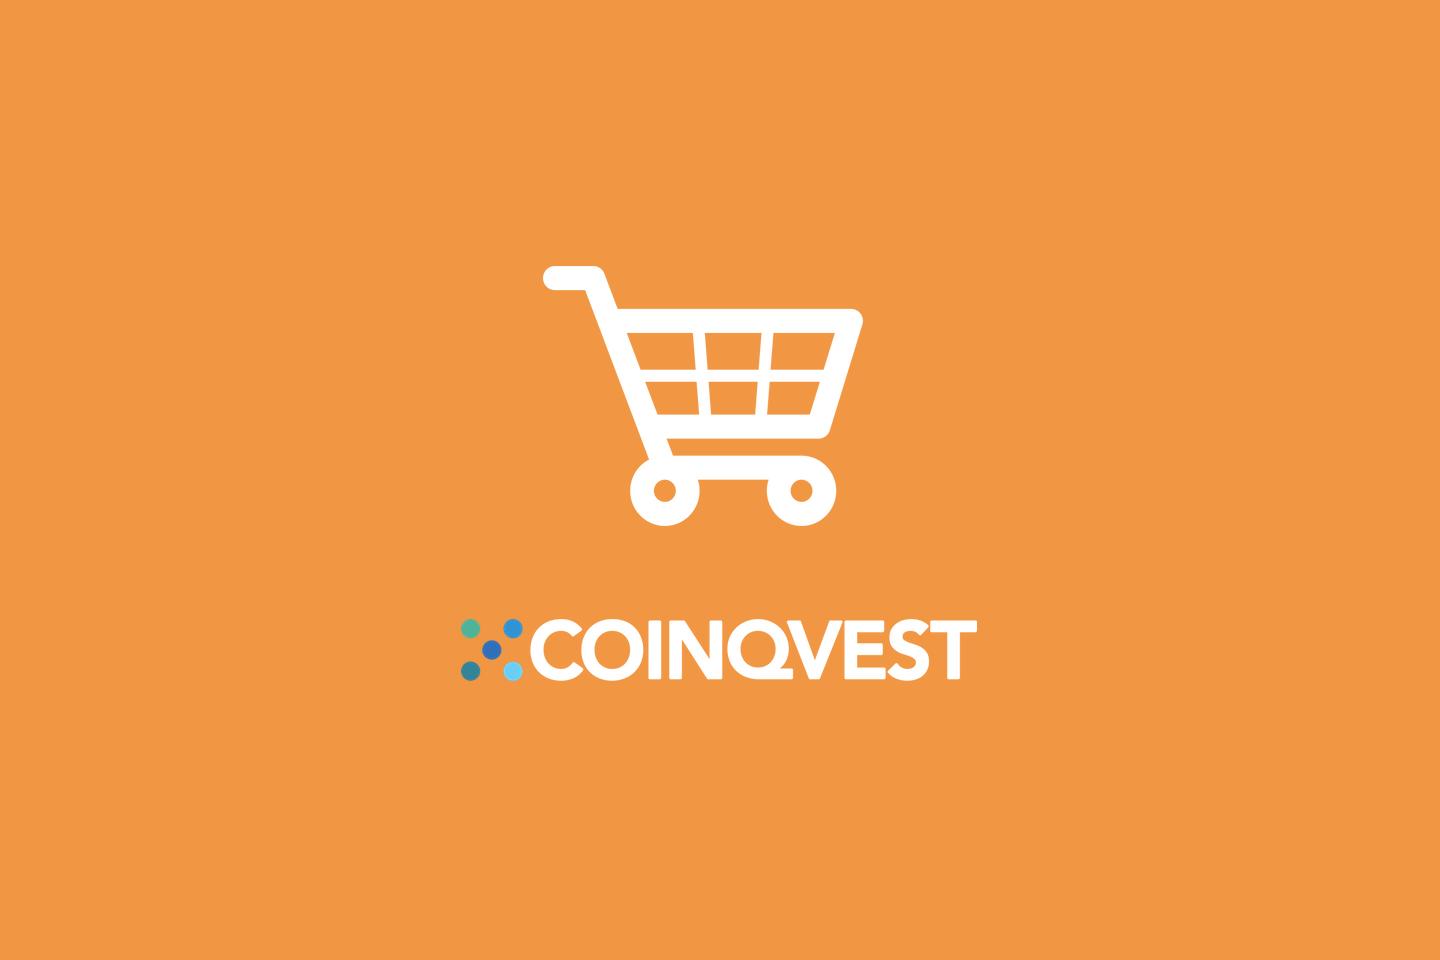 Hosted Checkouts with COINQVEST - Cryptocurrency Payment Processing for Online Businesses and E-Commerce